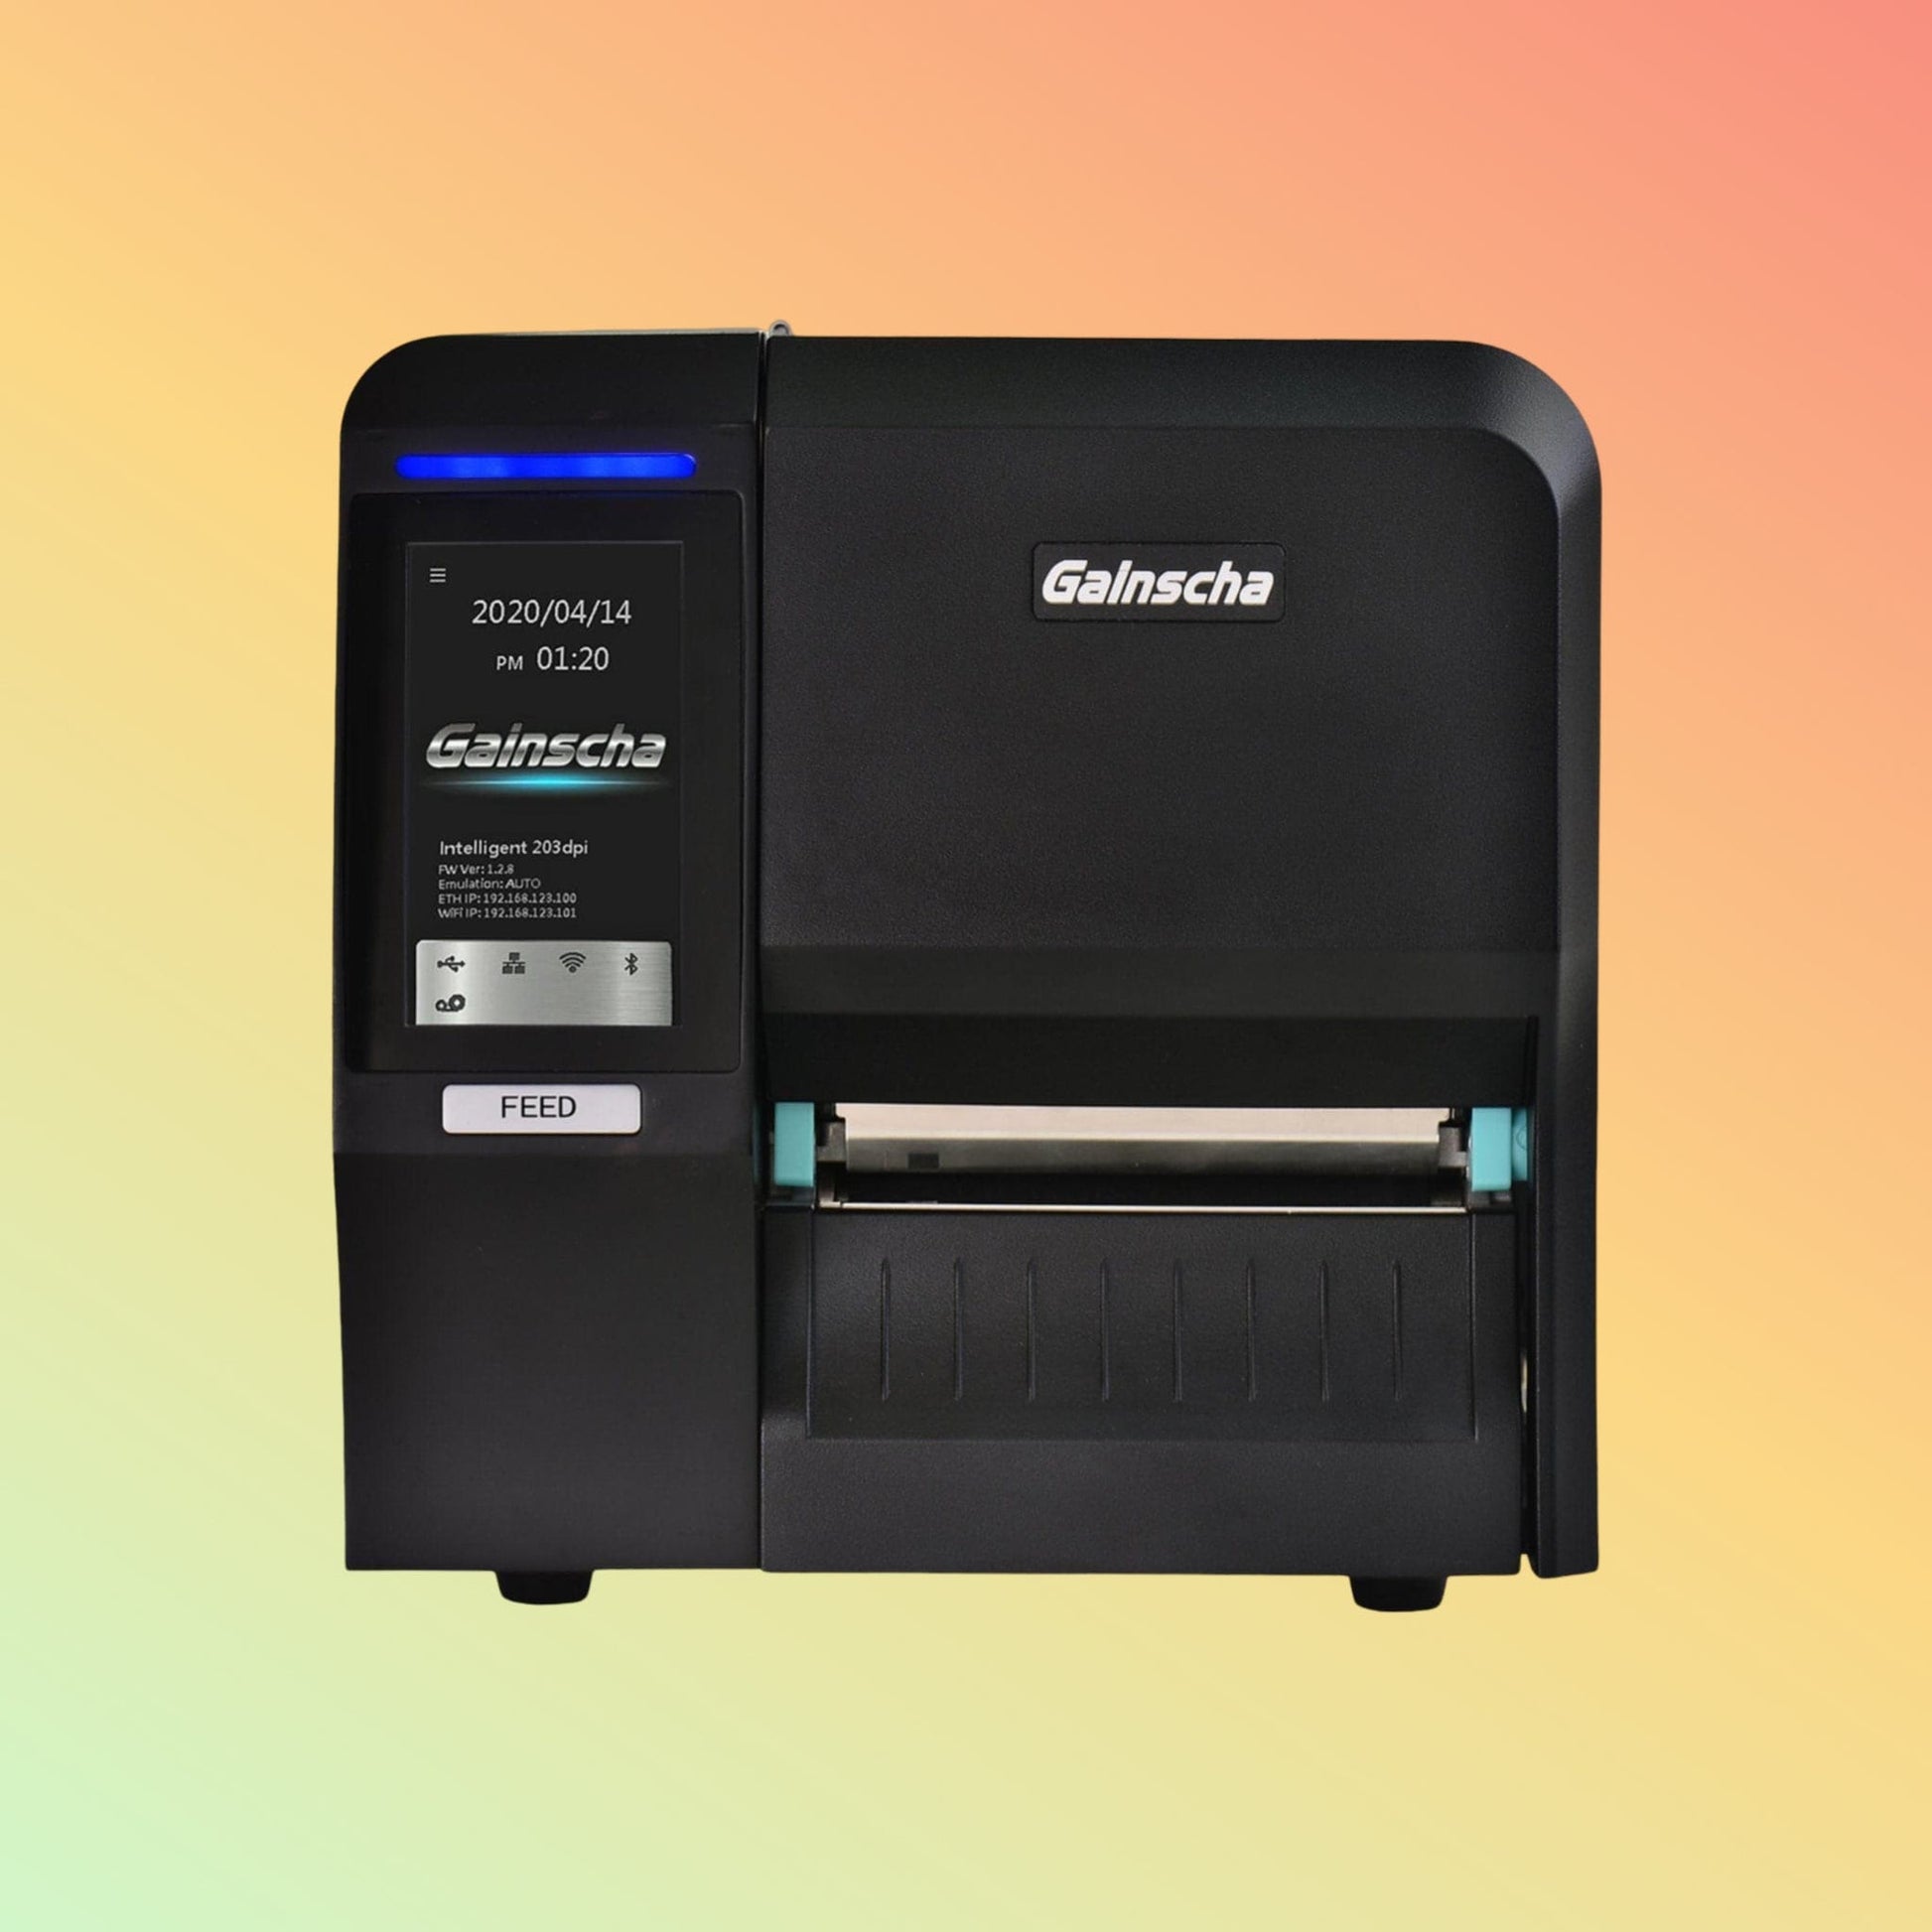 "High-performance Gainscha GI-2408T, built for industrial productivity with advanced printing technology and robust materials."